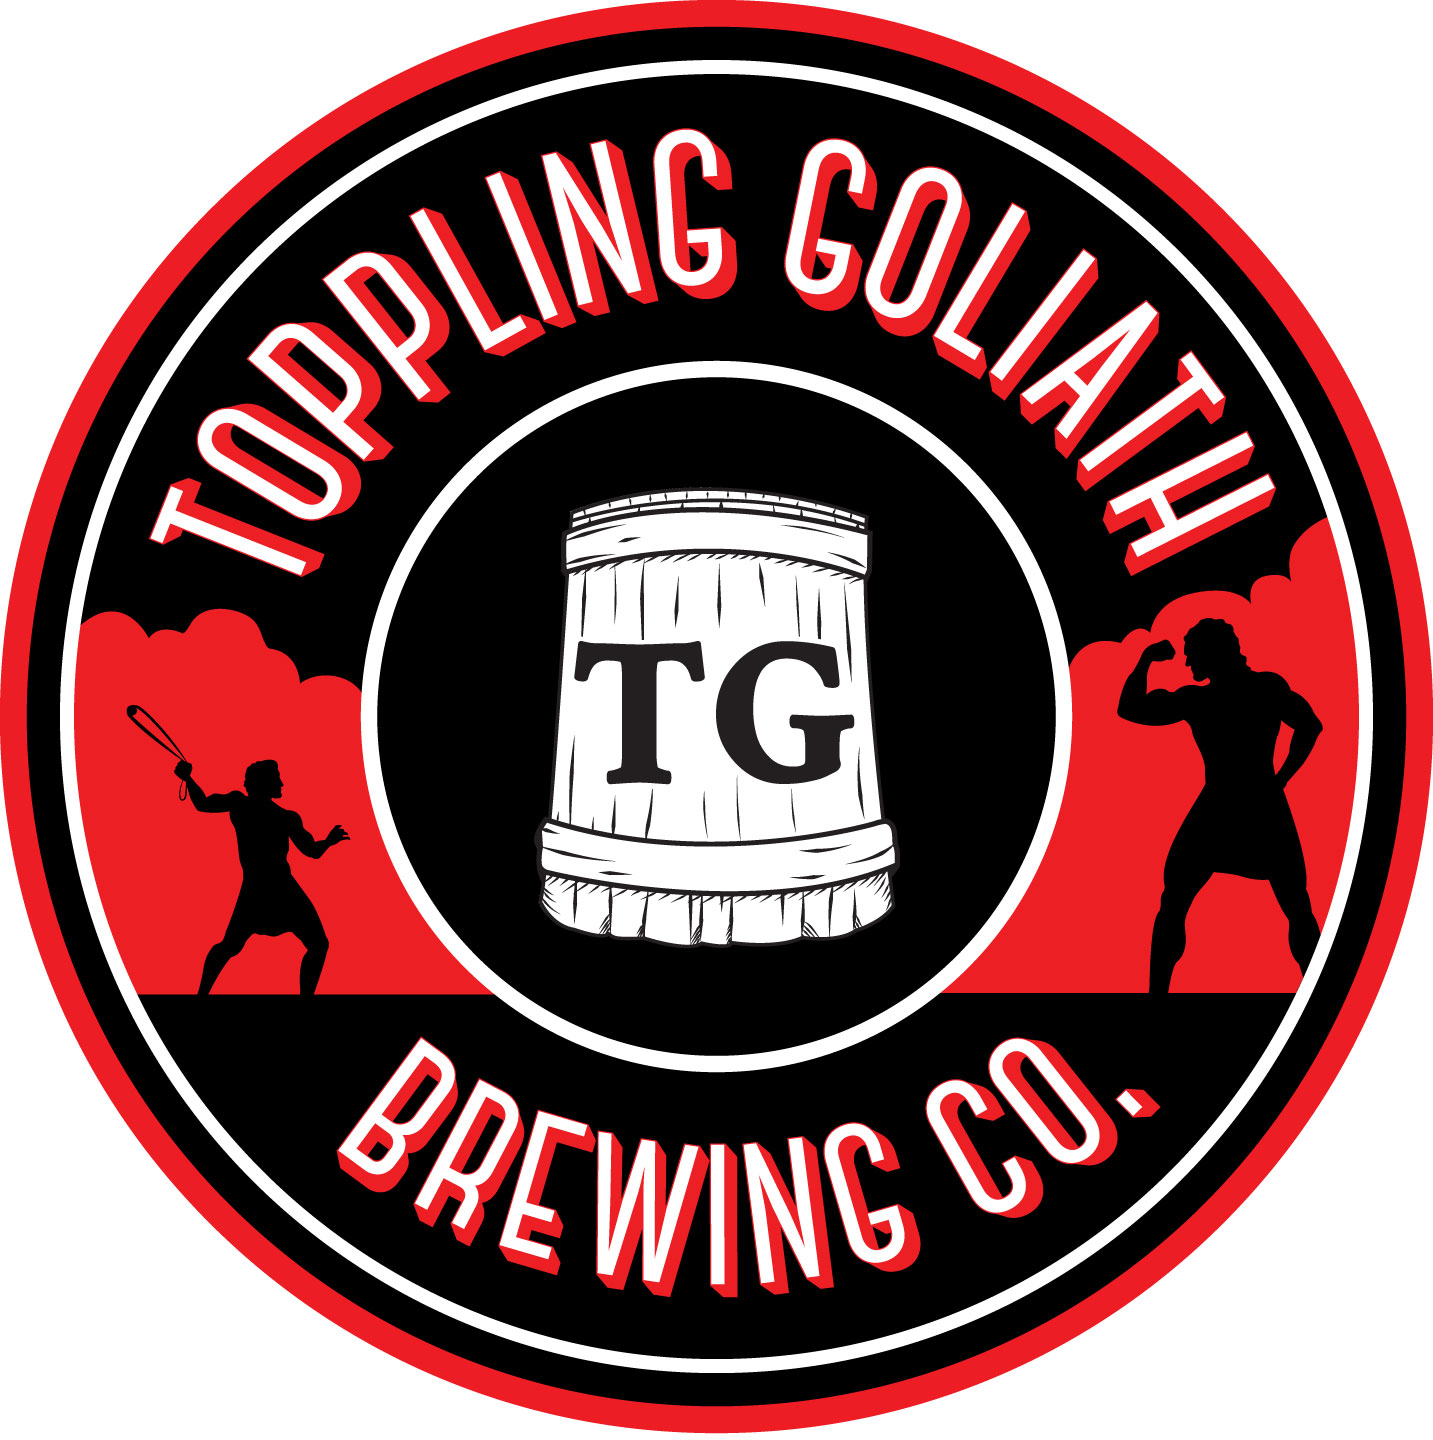 View Toppling Goliath Brewing Co.